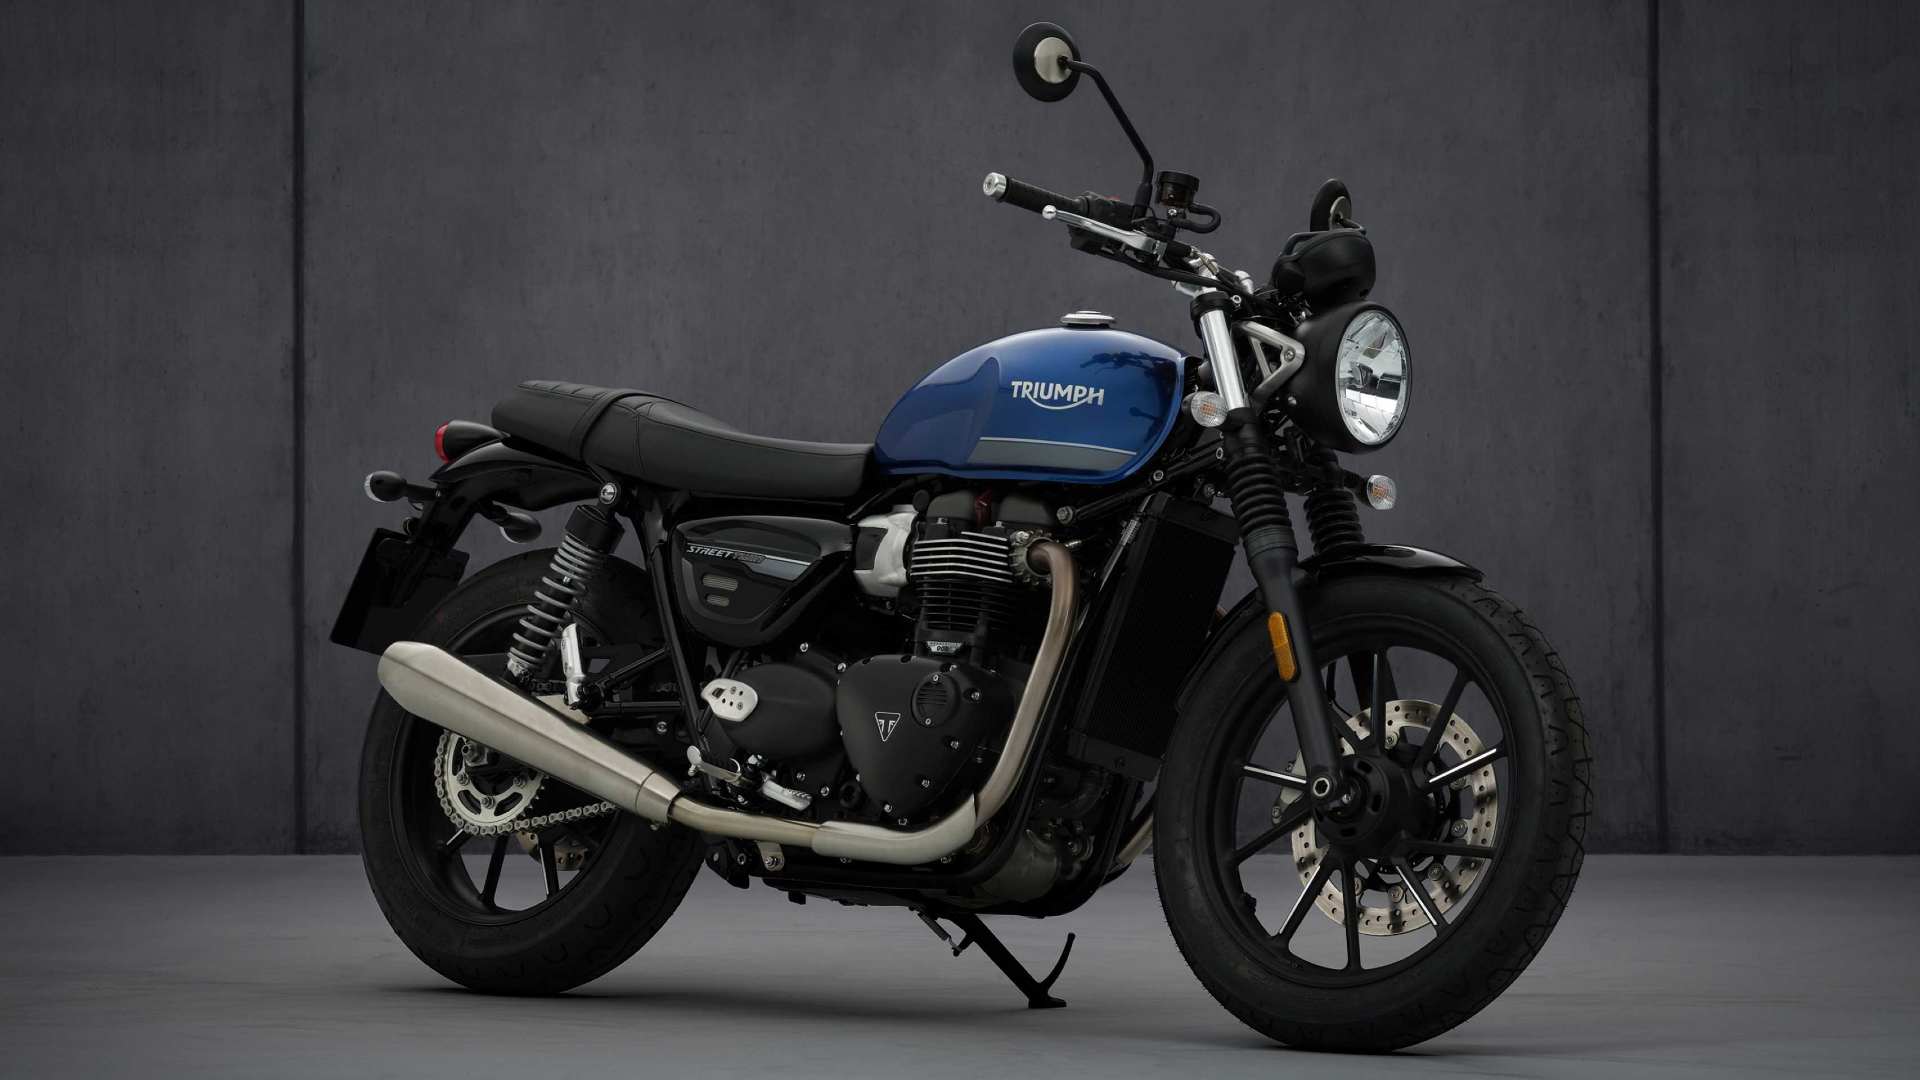 Cast aluminium wheels and a new seat are key additions for the 2021 Triumph Street Twin. Image: Triumph Motorcycles